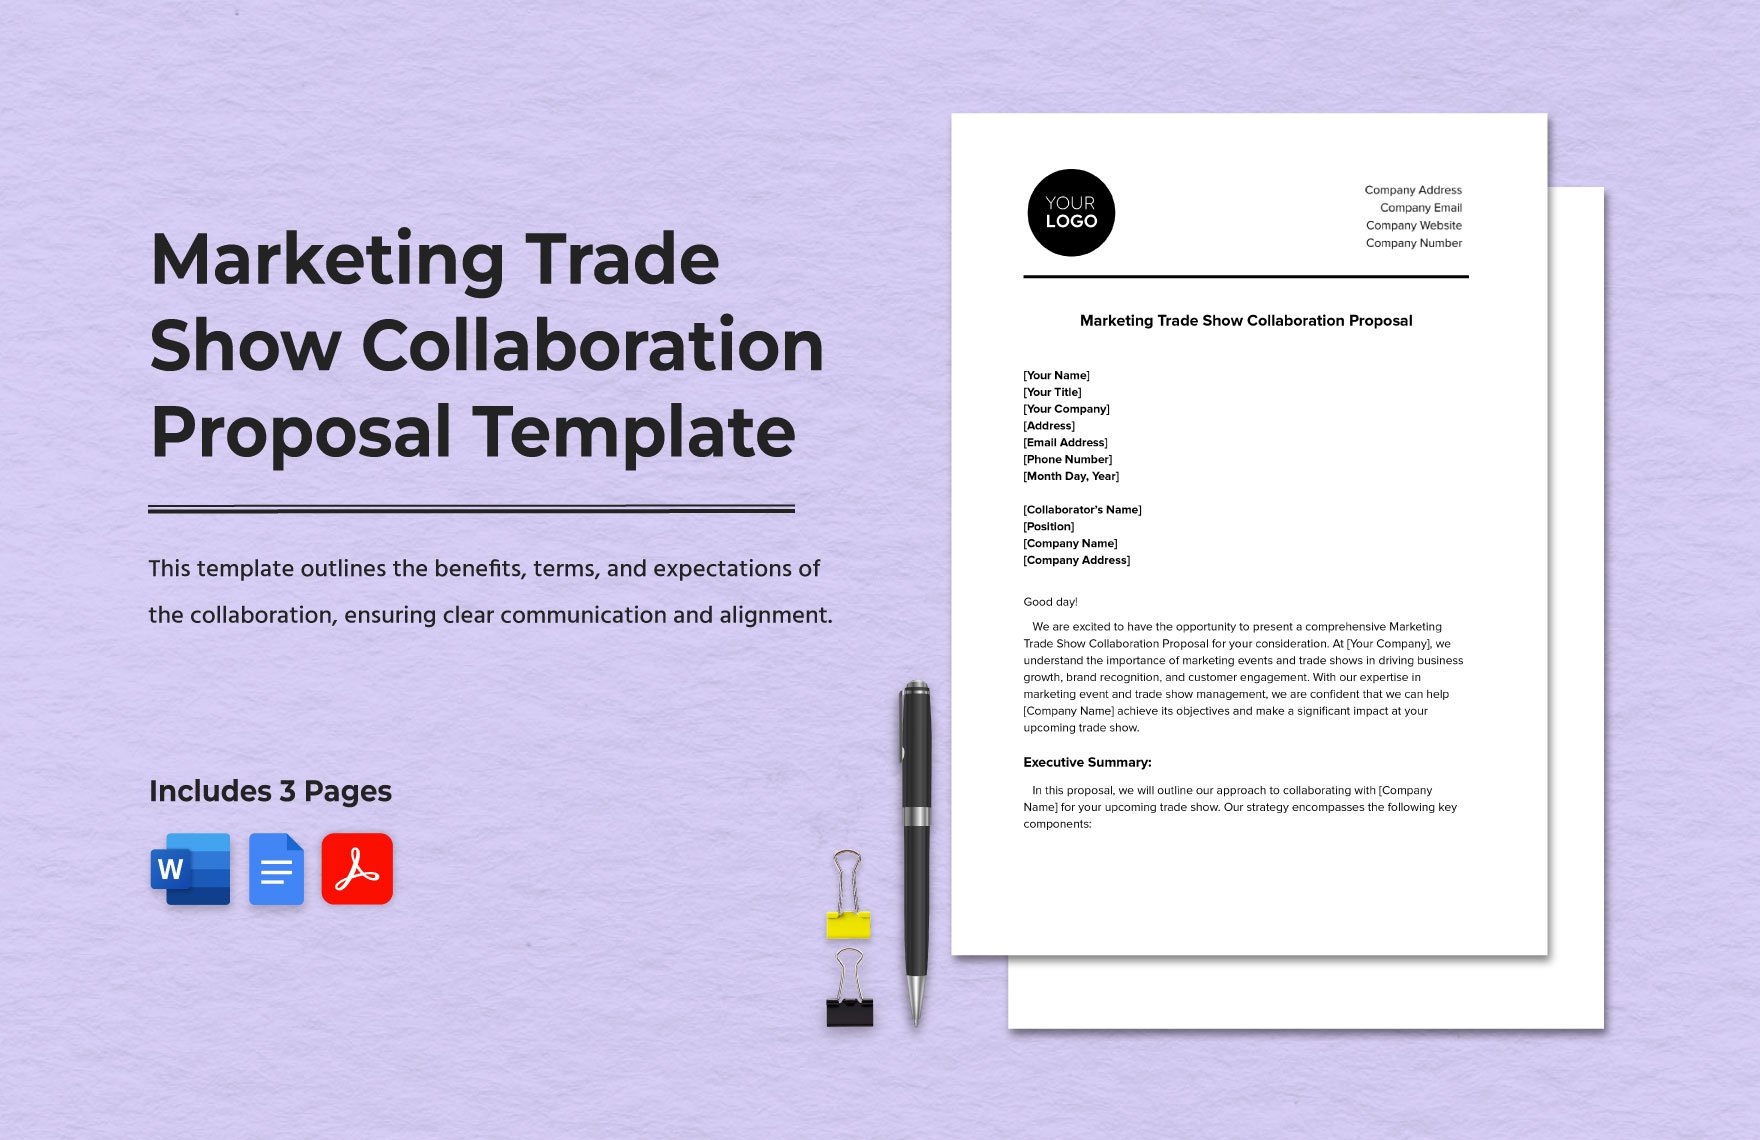 Marketing Trade Show Collaboration Proposal Template in Word, Google Docs, PDF